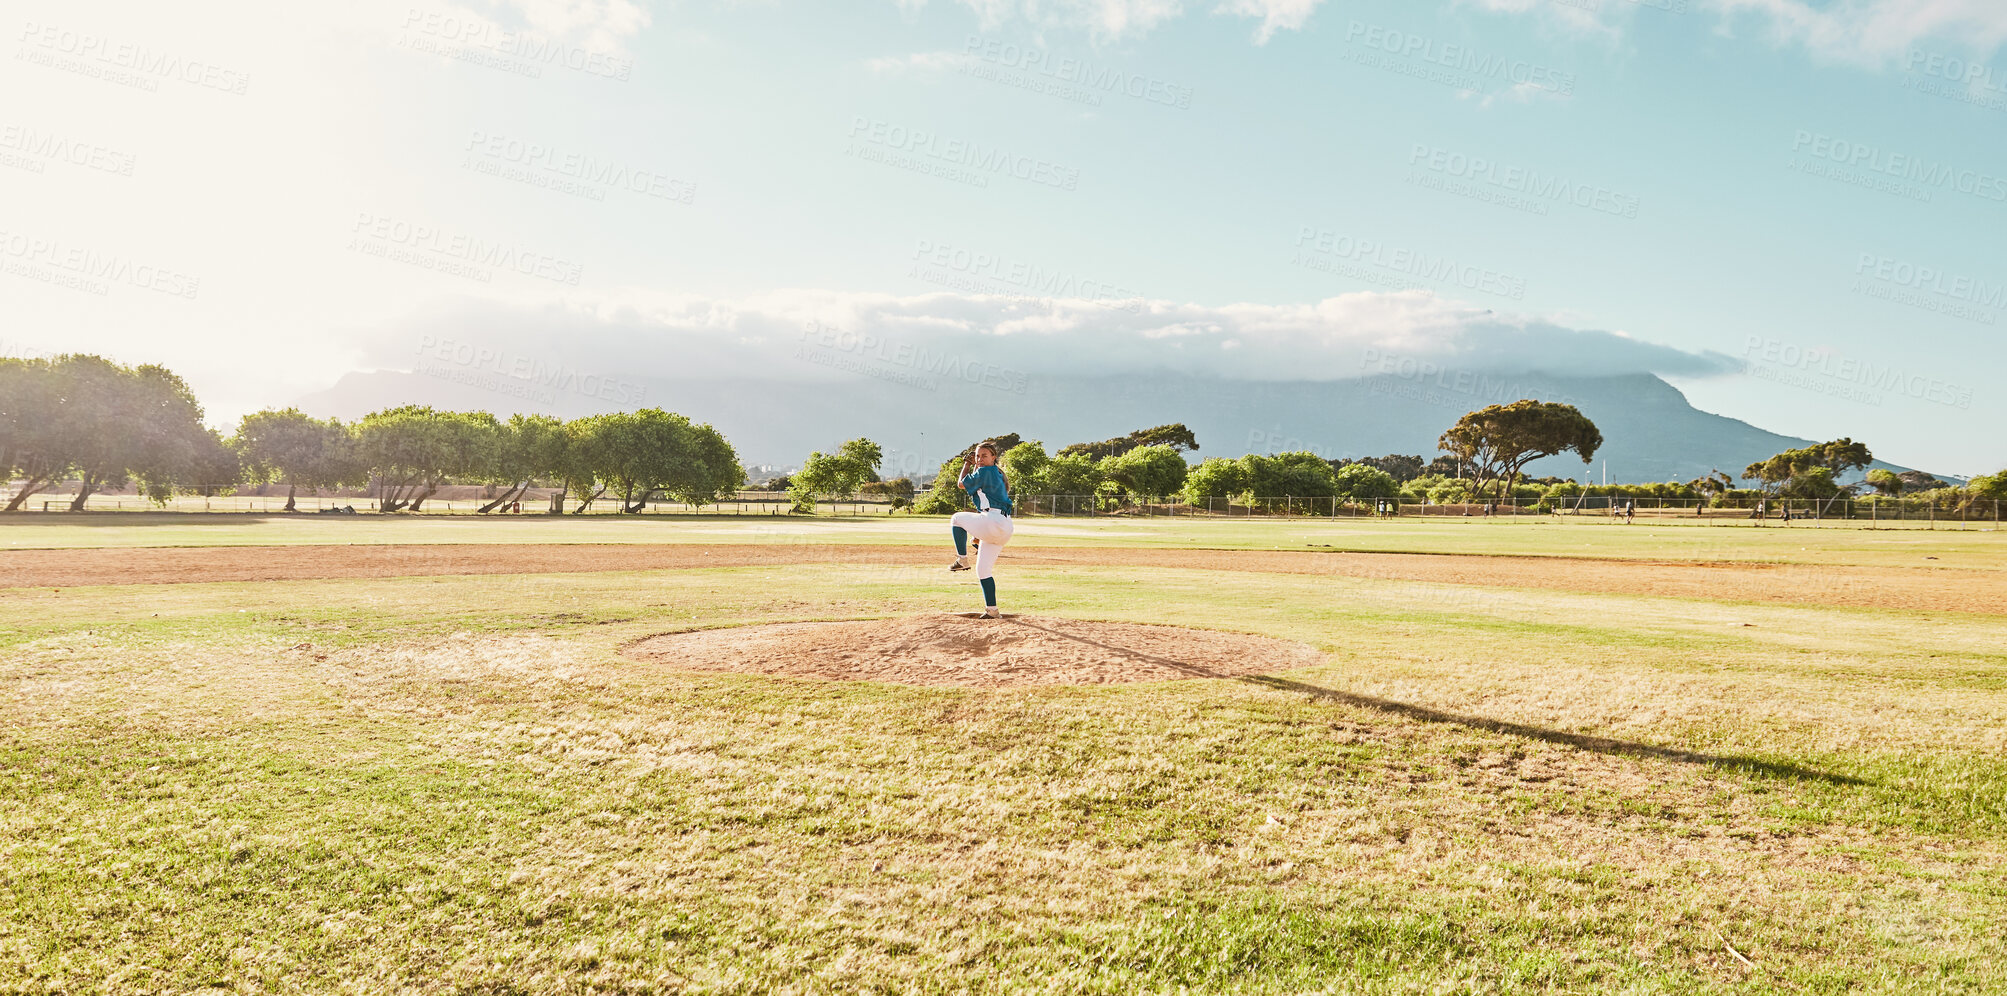 Buy stock photo Panoramic of pitcher on field for a game of baseball, ready to pitch and throw the ball. Baseball player standing alone on pitcher's mound on baseball field for practice, training and sports match
